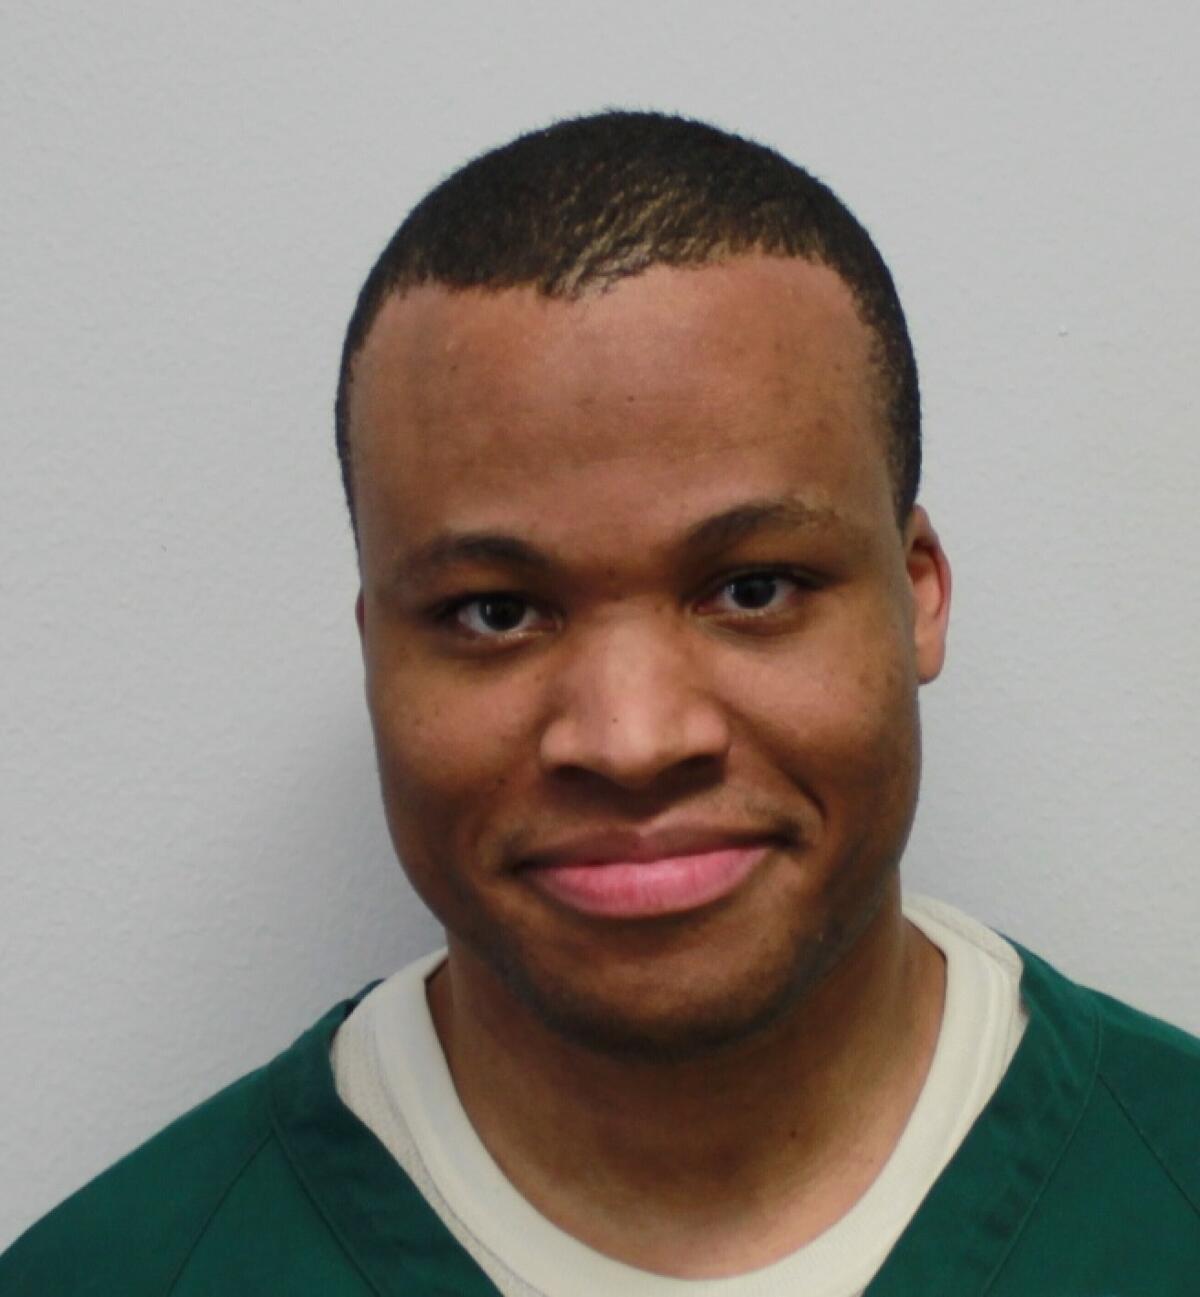 FILE - This photo provided by the Virginia Department of Corrections shows Lee Boyd Malvo. Virginia has denied parole to convicted sniper killer Malvo, ruling that he is still a risk to the community two decades after he and his partner terrorized the Washington, D.C., region with a series of random shootings. The Virginia Parole Board rejected his request on Aug. 30, 2022 (Virginia Department of Corrections via AP, File)